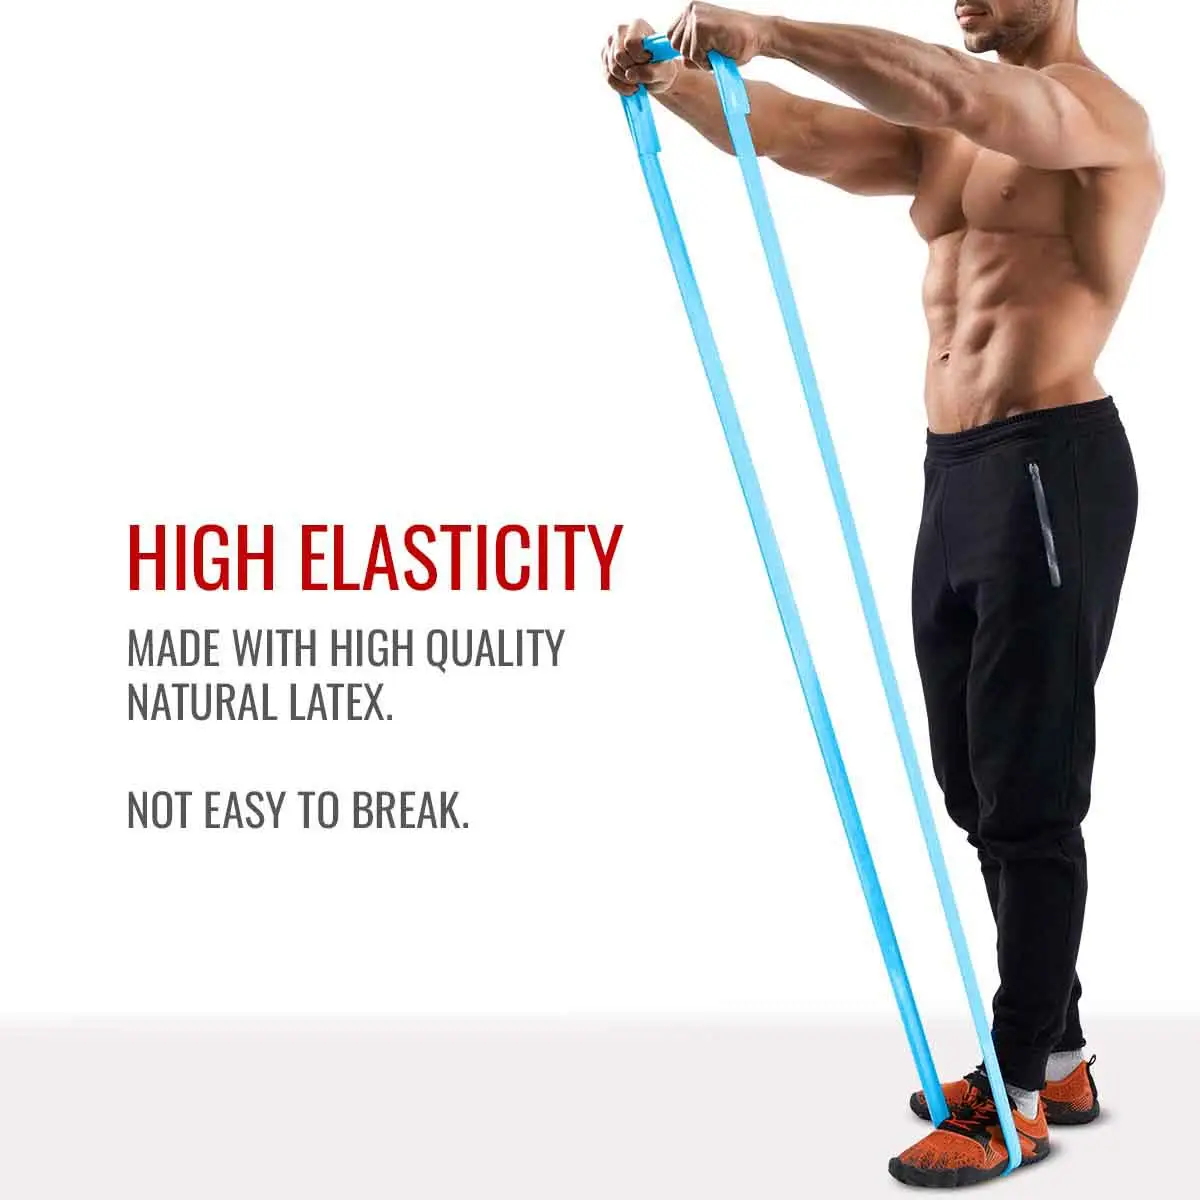 Durafit Resistance Band Orlb2 with High Elasticity